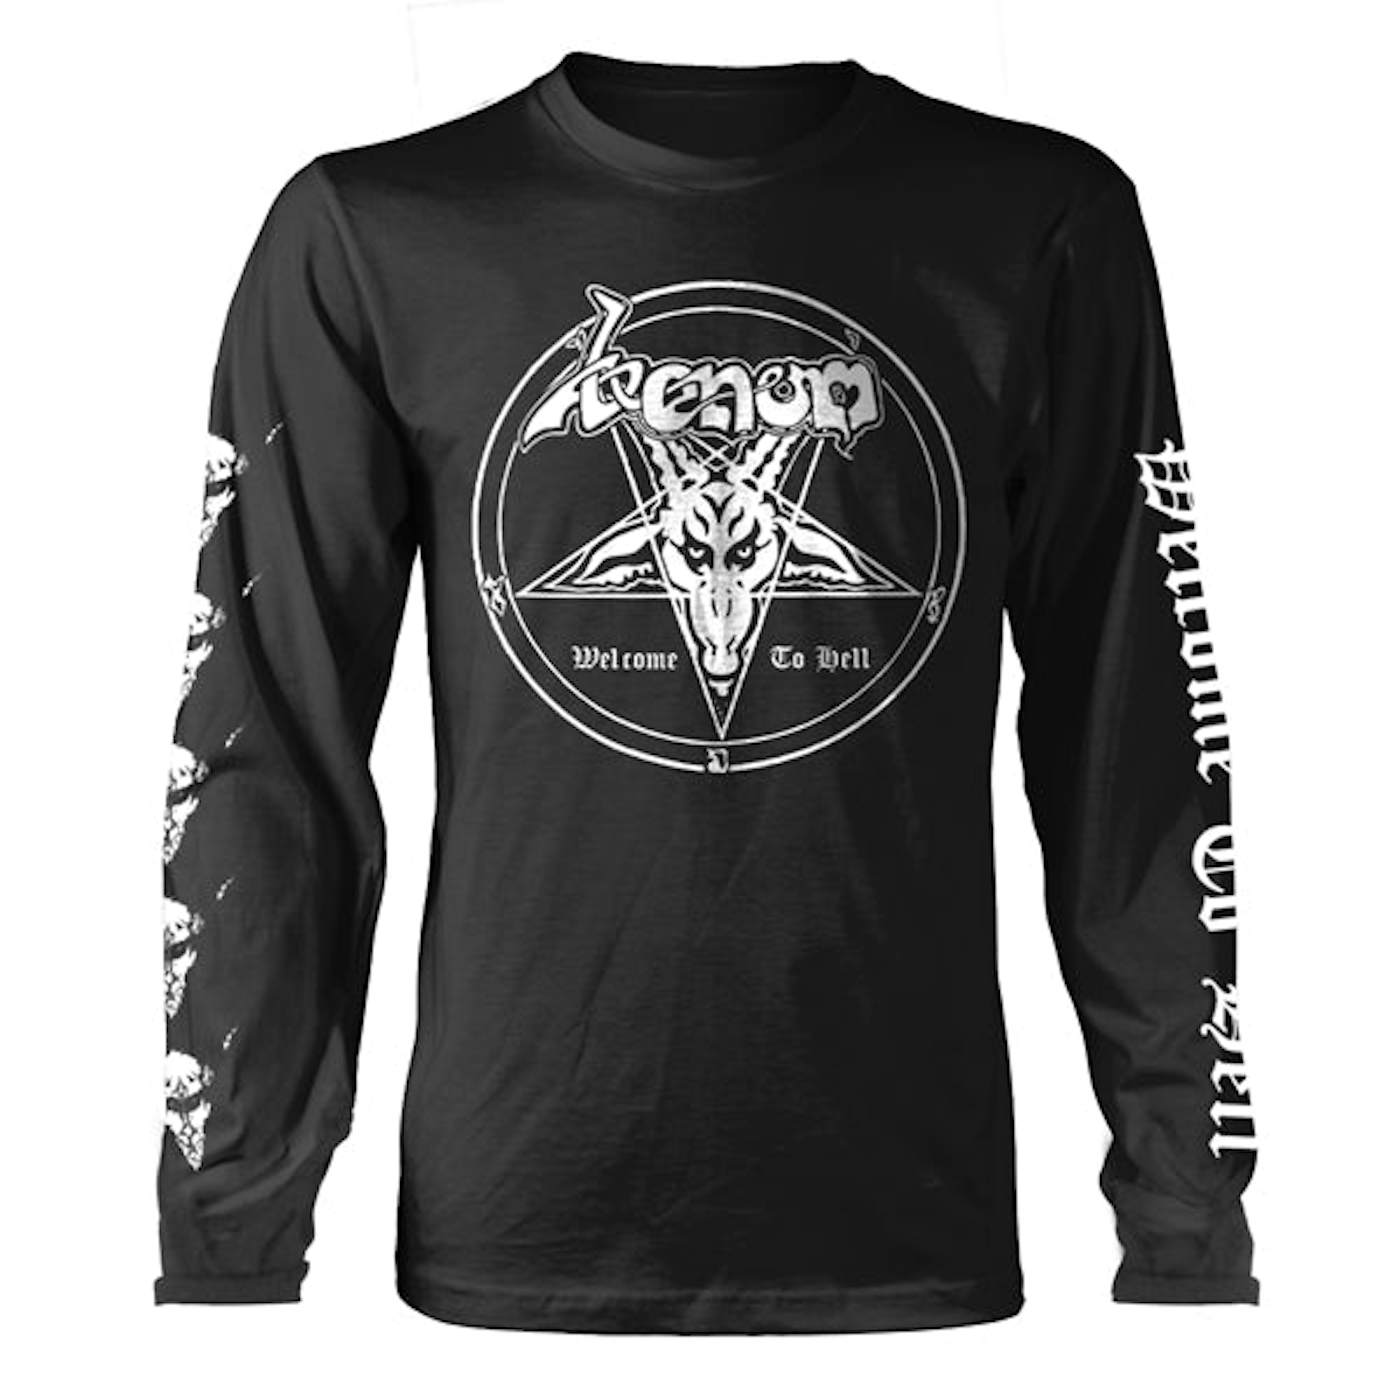  Venom Long Sleeve T Shirt - Welcome To Hell (White)